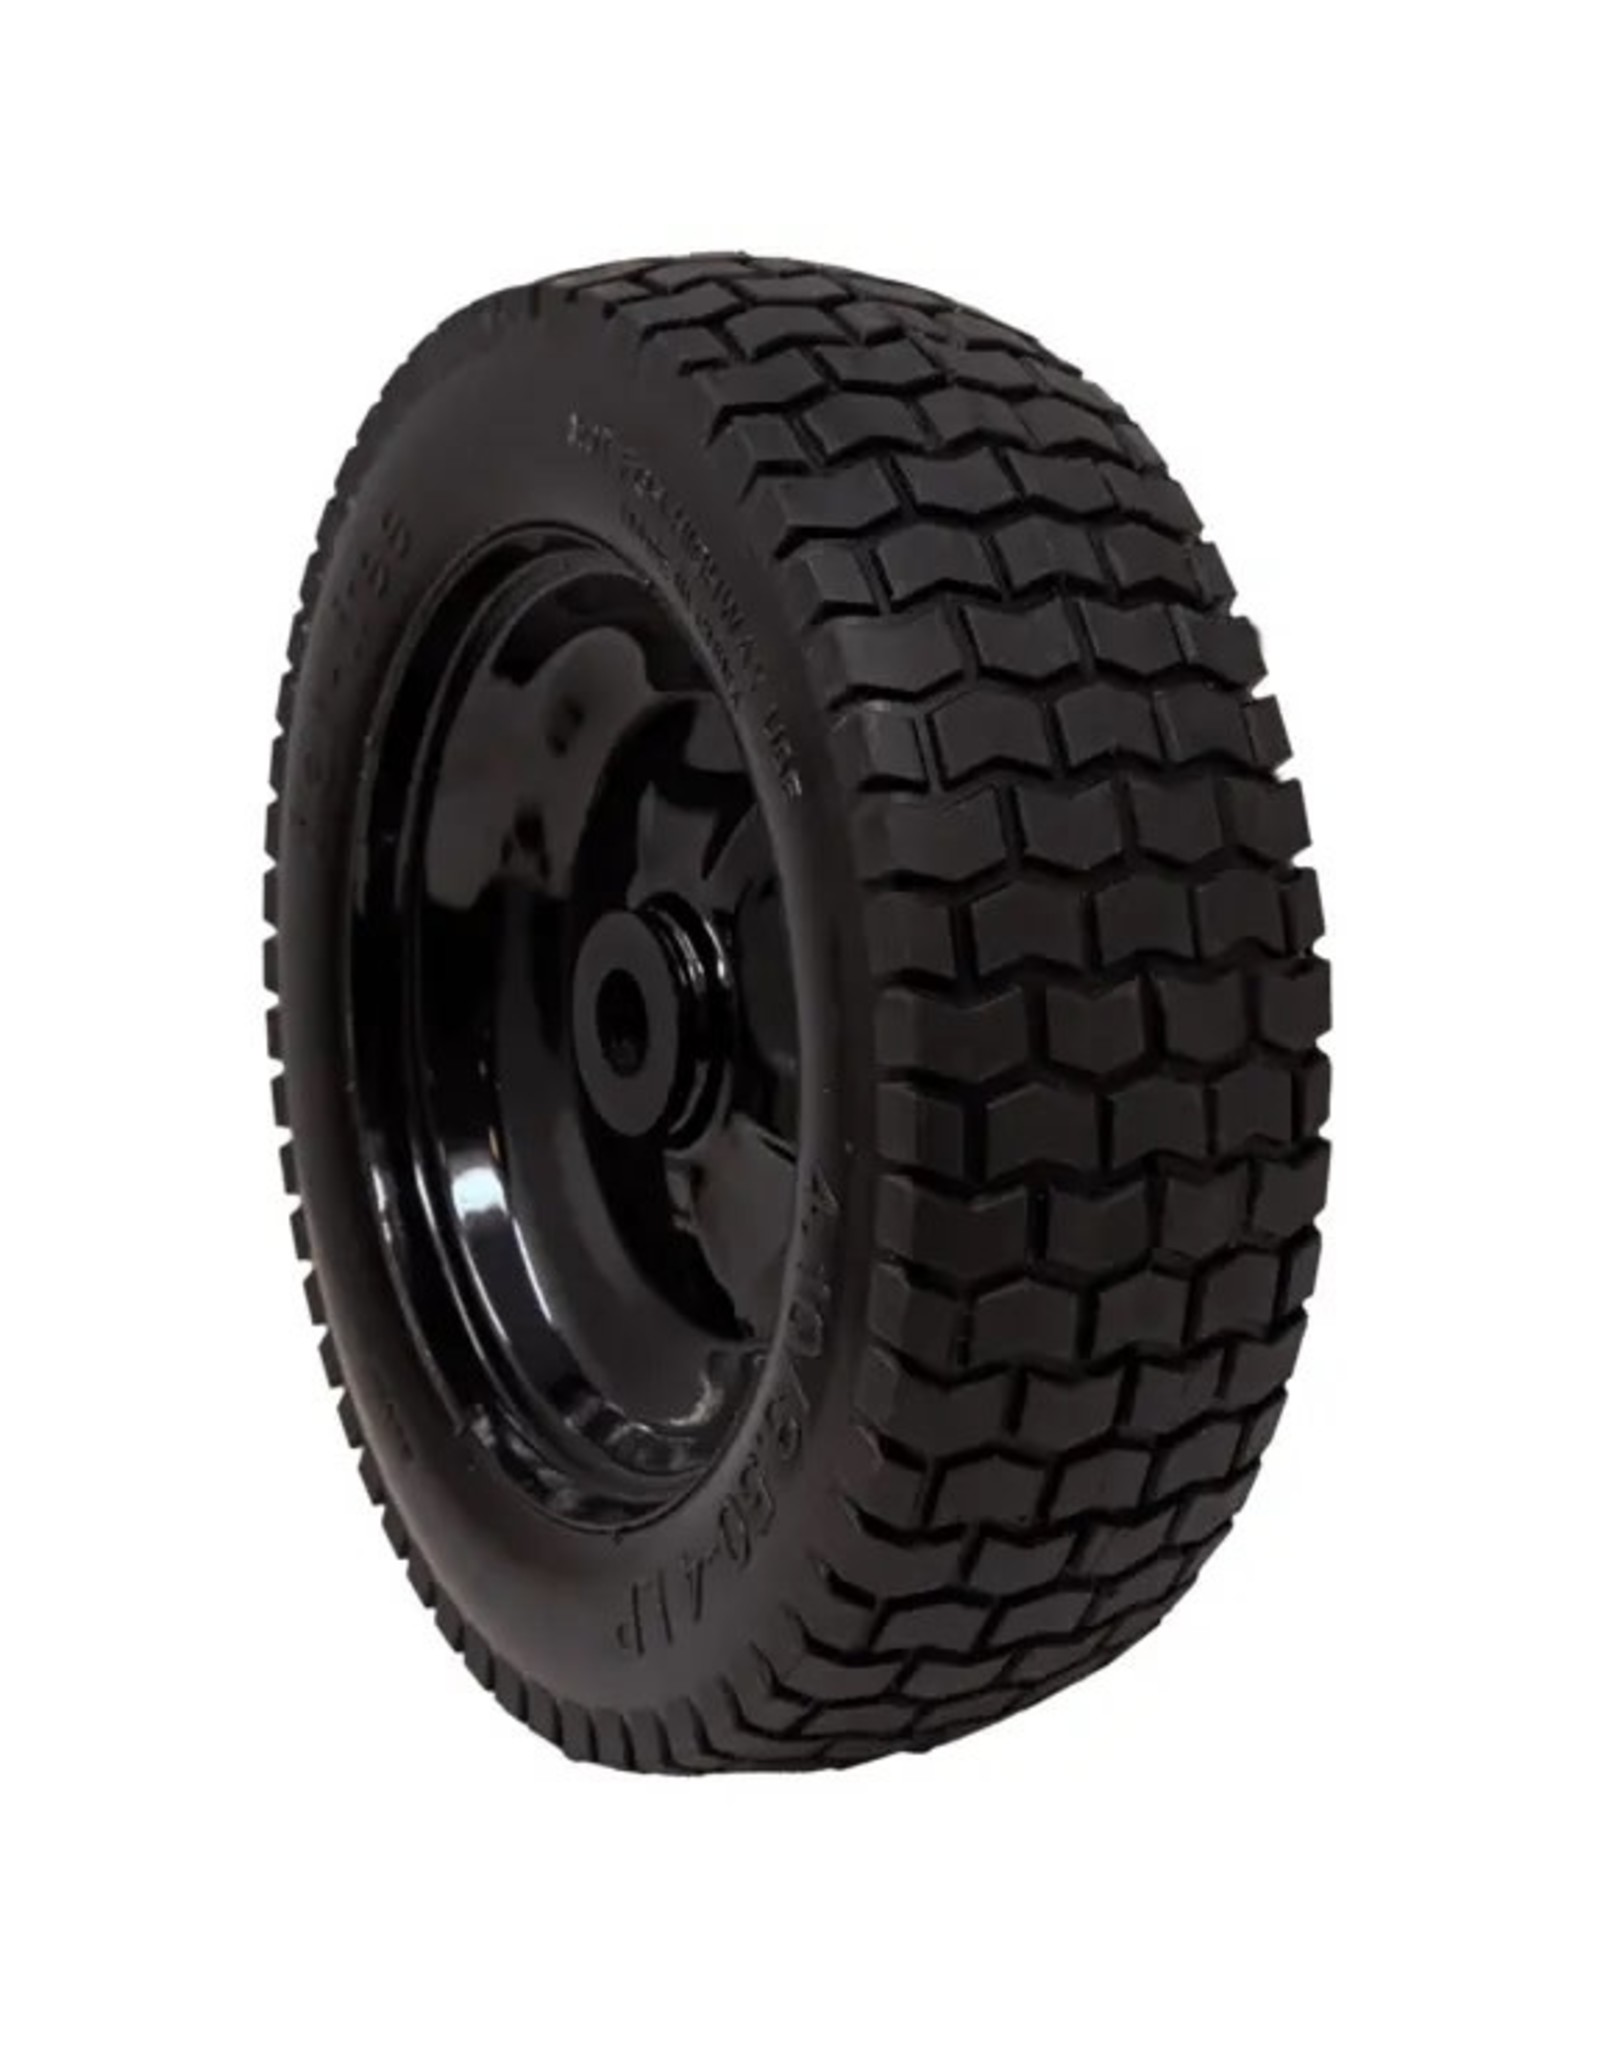 BE 85.660.055BF Foam Filled 10" Tire and Wheel 3/4" Shaft Size